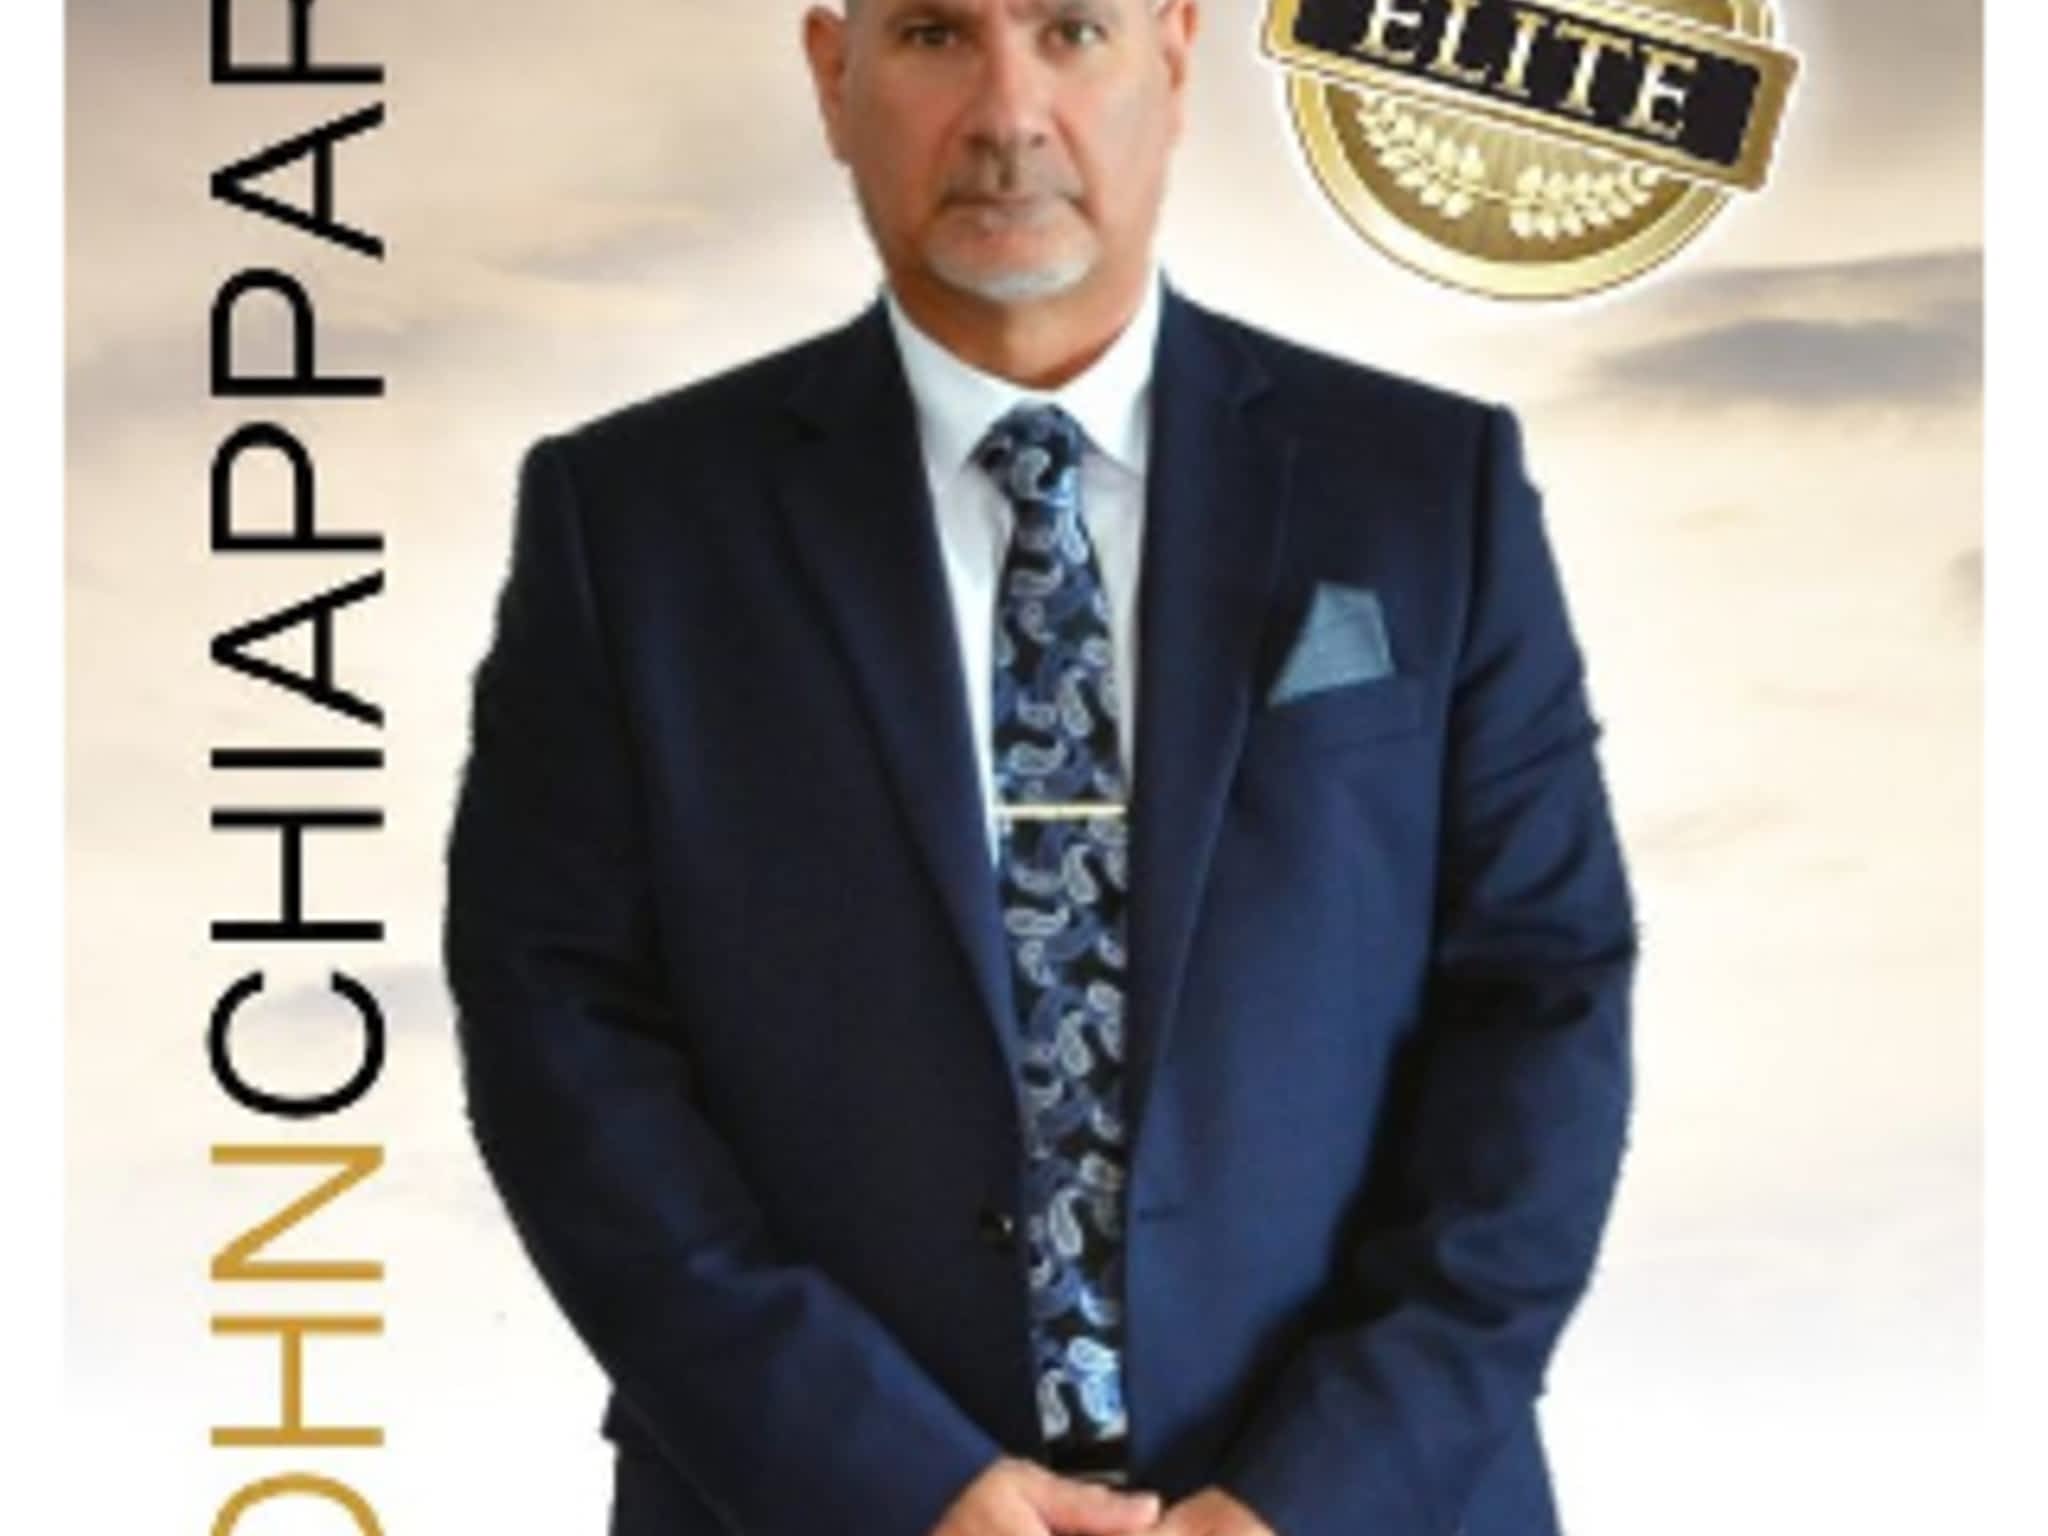 photo John Chiappara-Real Estate Agent, L’Expert Immobilier